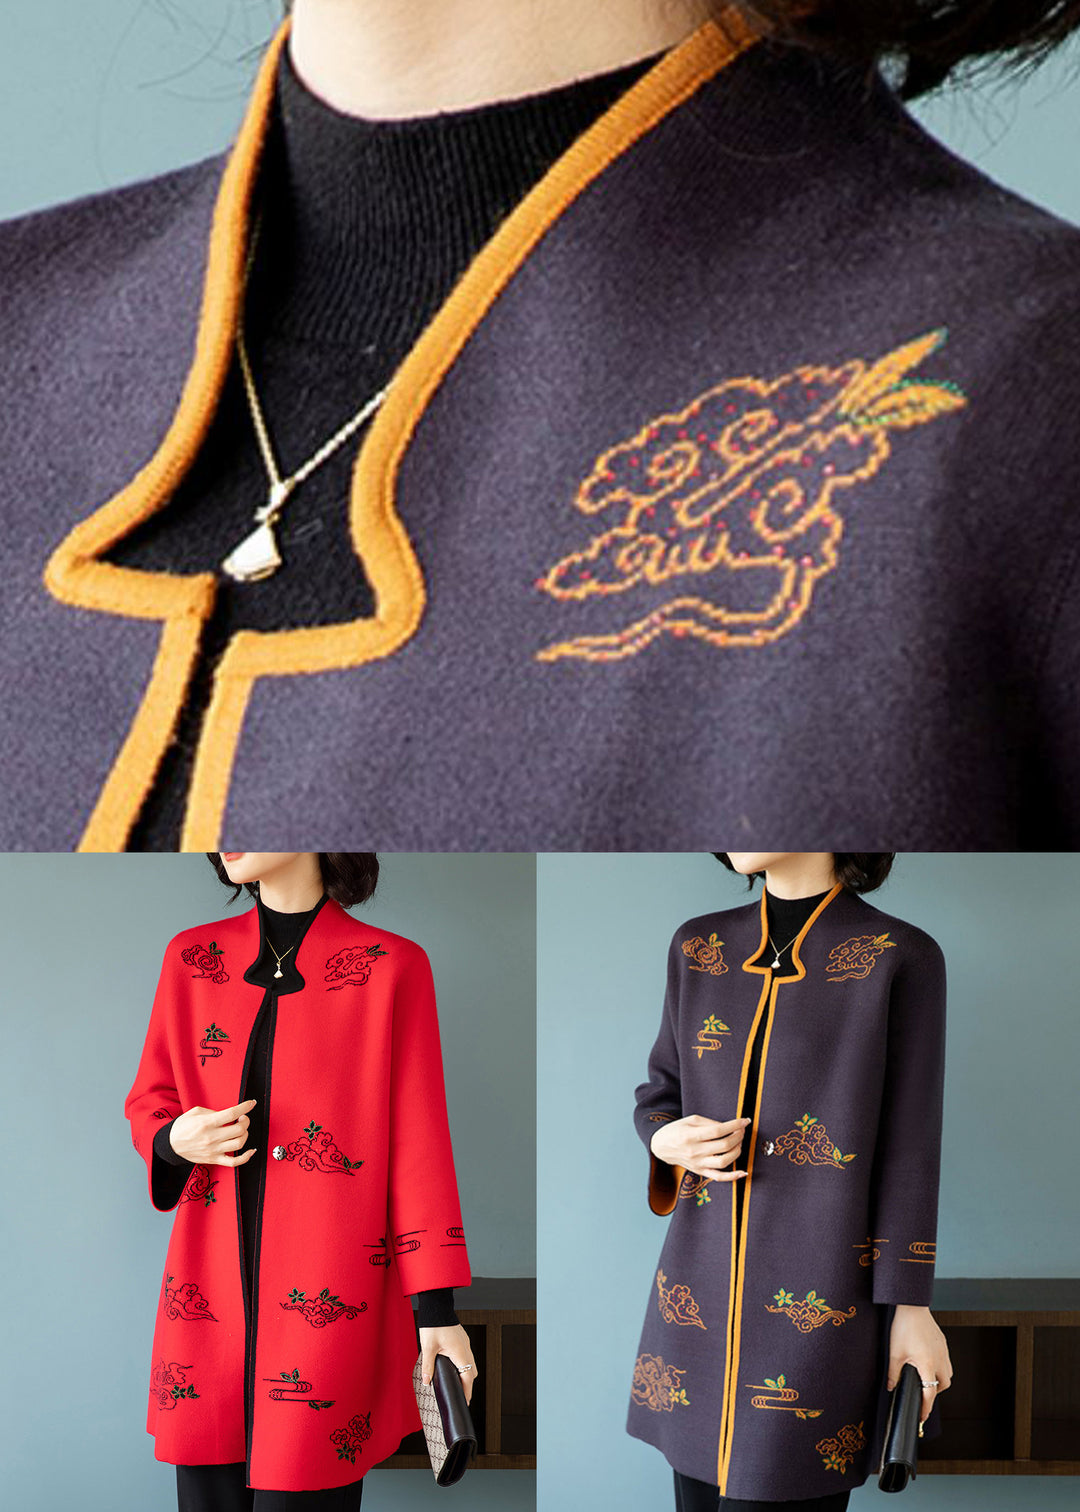 Red Embroideried Stand Collar Patchwork Wool Coats Stand Collar Long Sleeve